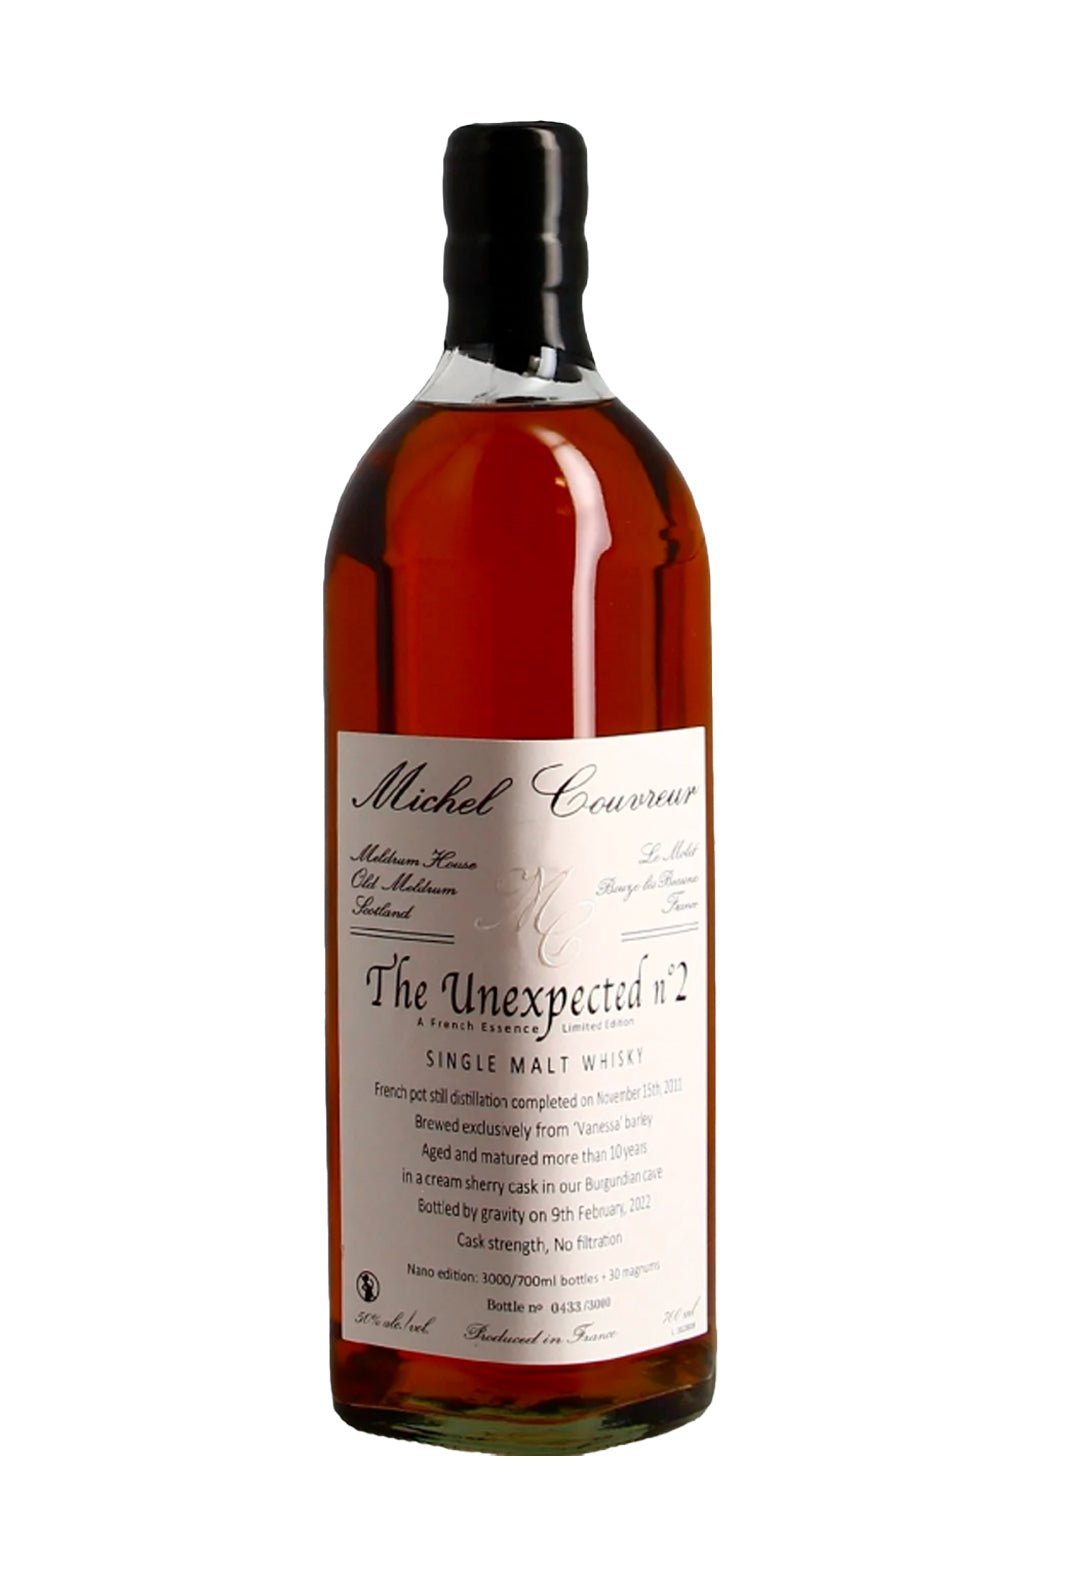 Micher Couvreur Unexpected II French Whisky Single Malt 50% 700ml | Whiskey | Shop online at Spirits of France